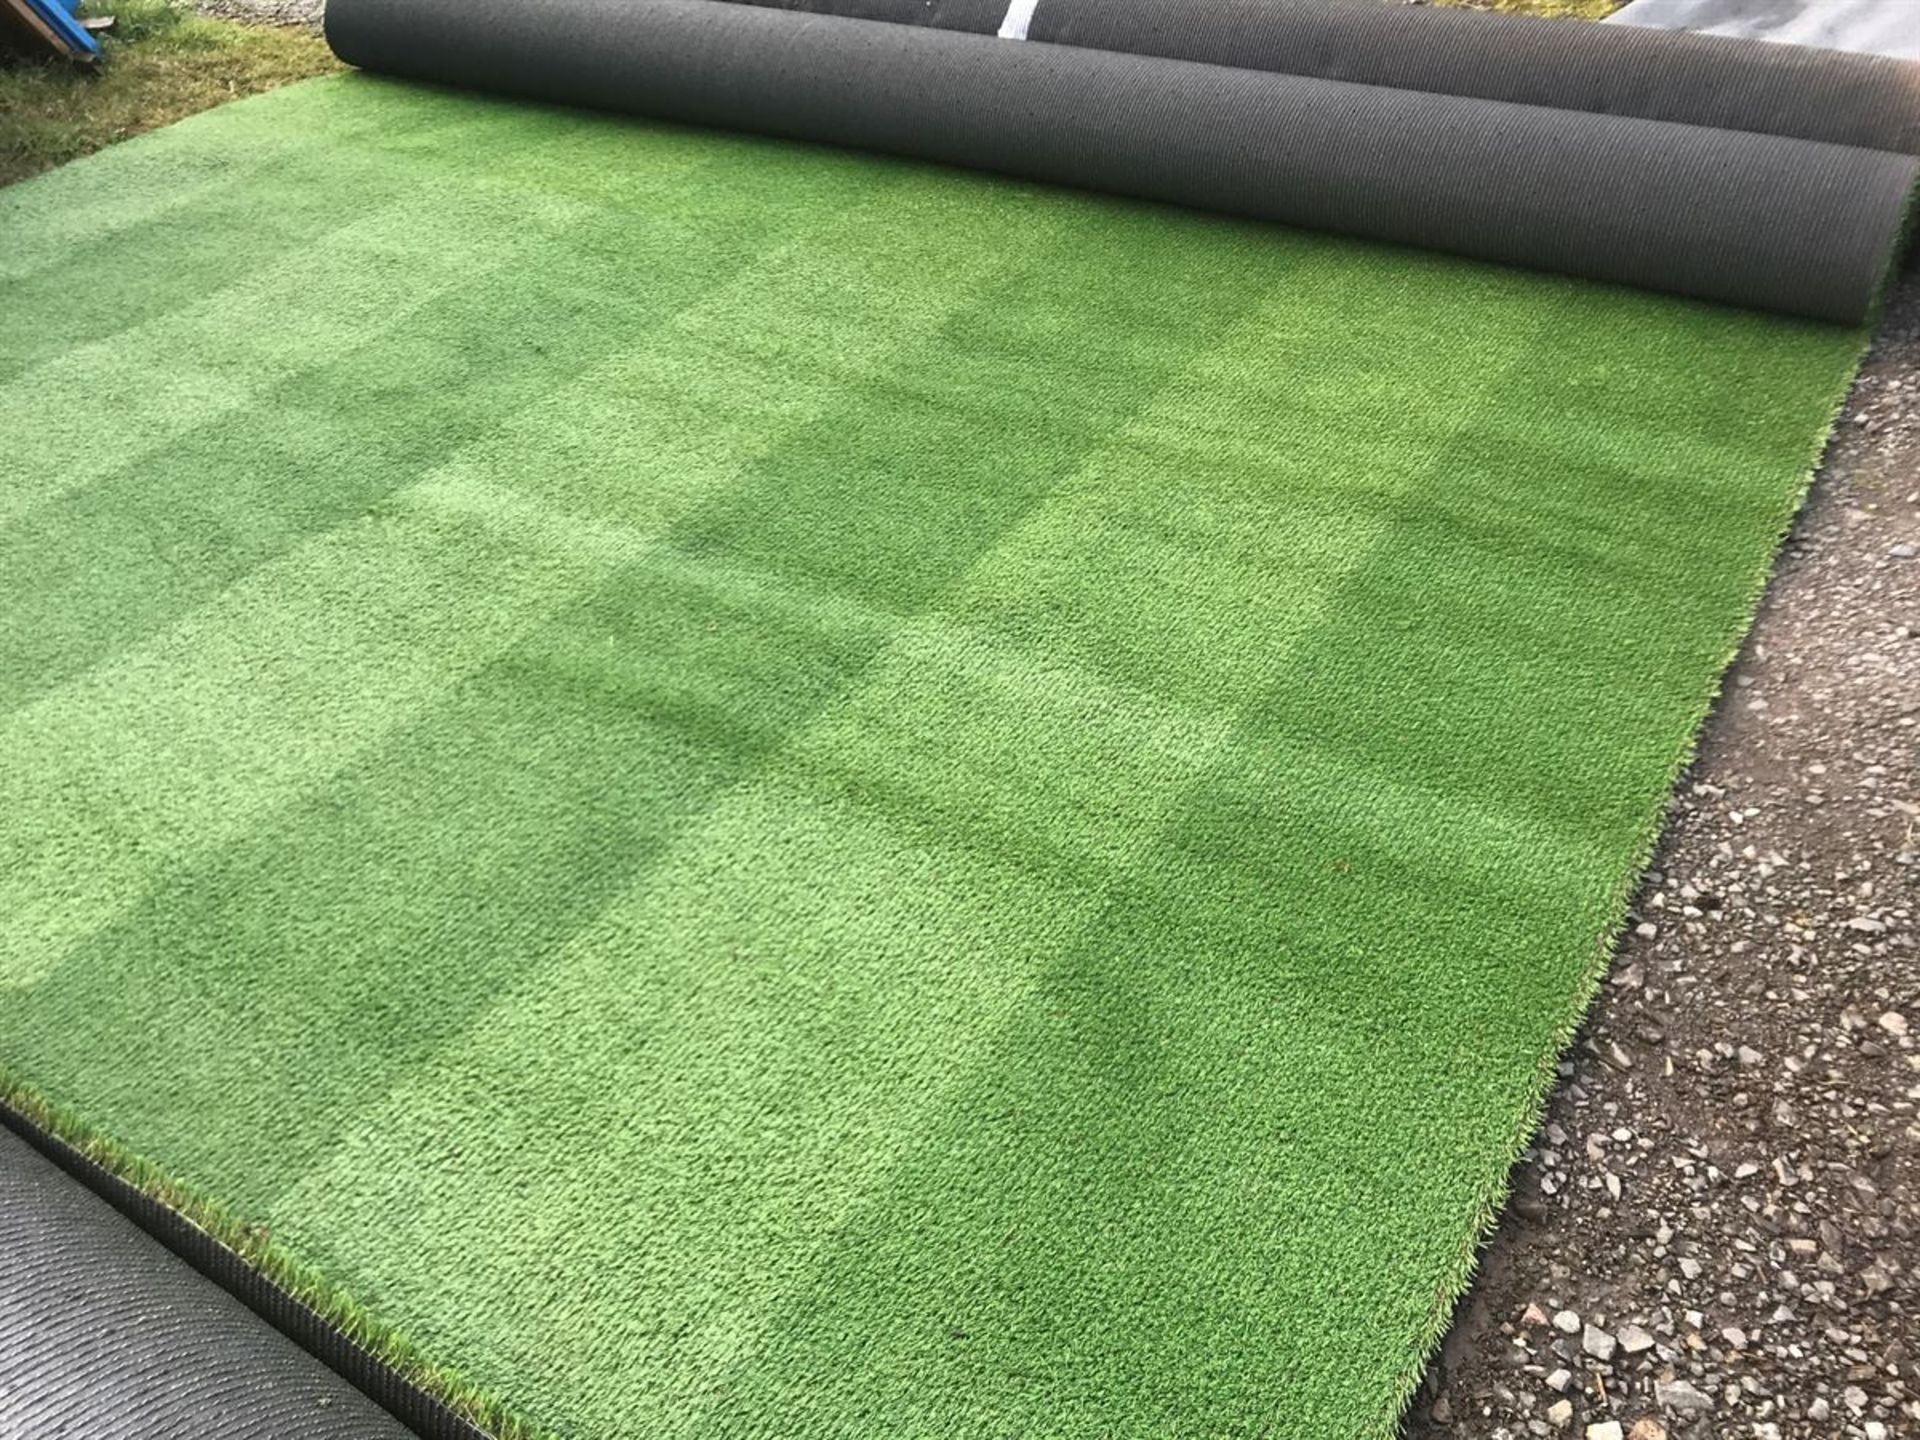 25m x 4m Total 100m2 Regency Lawn/Multi Sports Synthetic Grass - Image 2 of 2